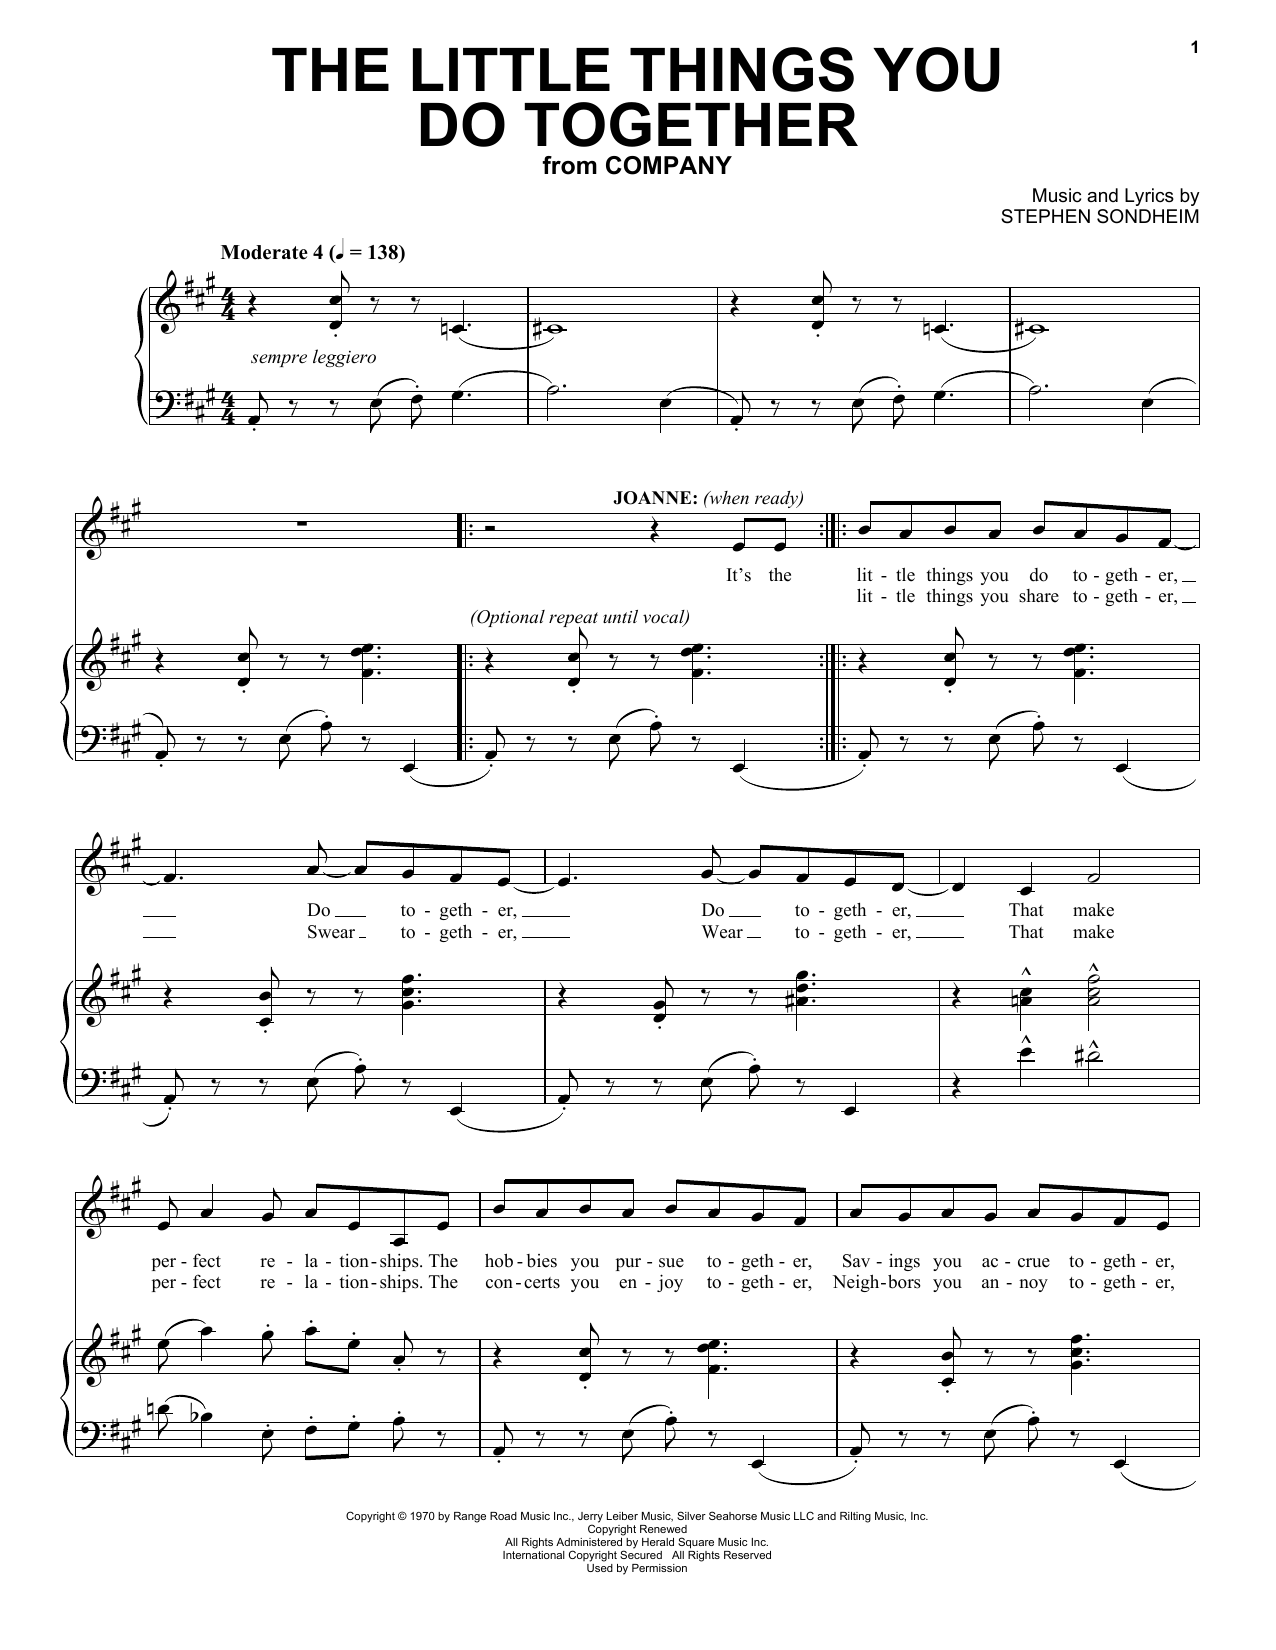 Stephen Sondheim The Little Things You Do Together sheet music notes and chords. Download Printable PDF.